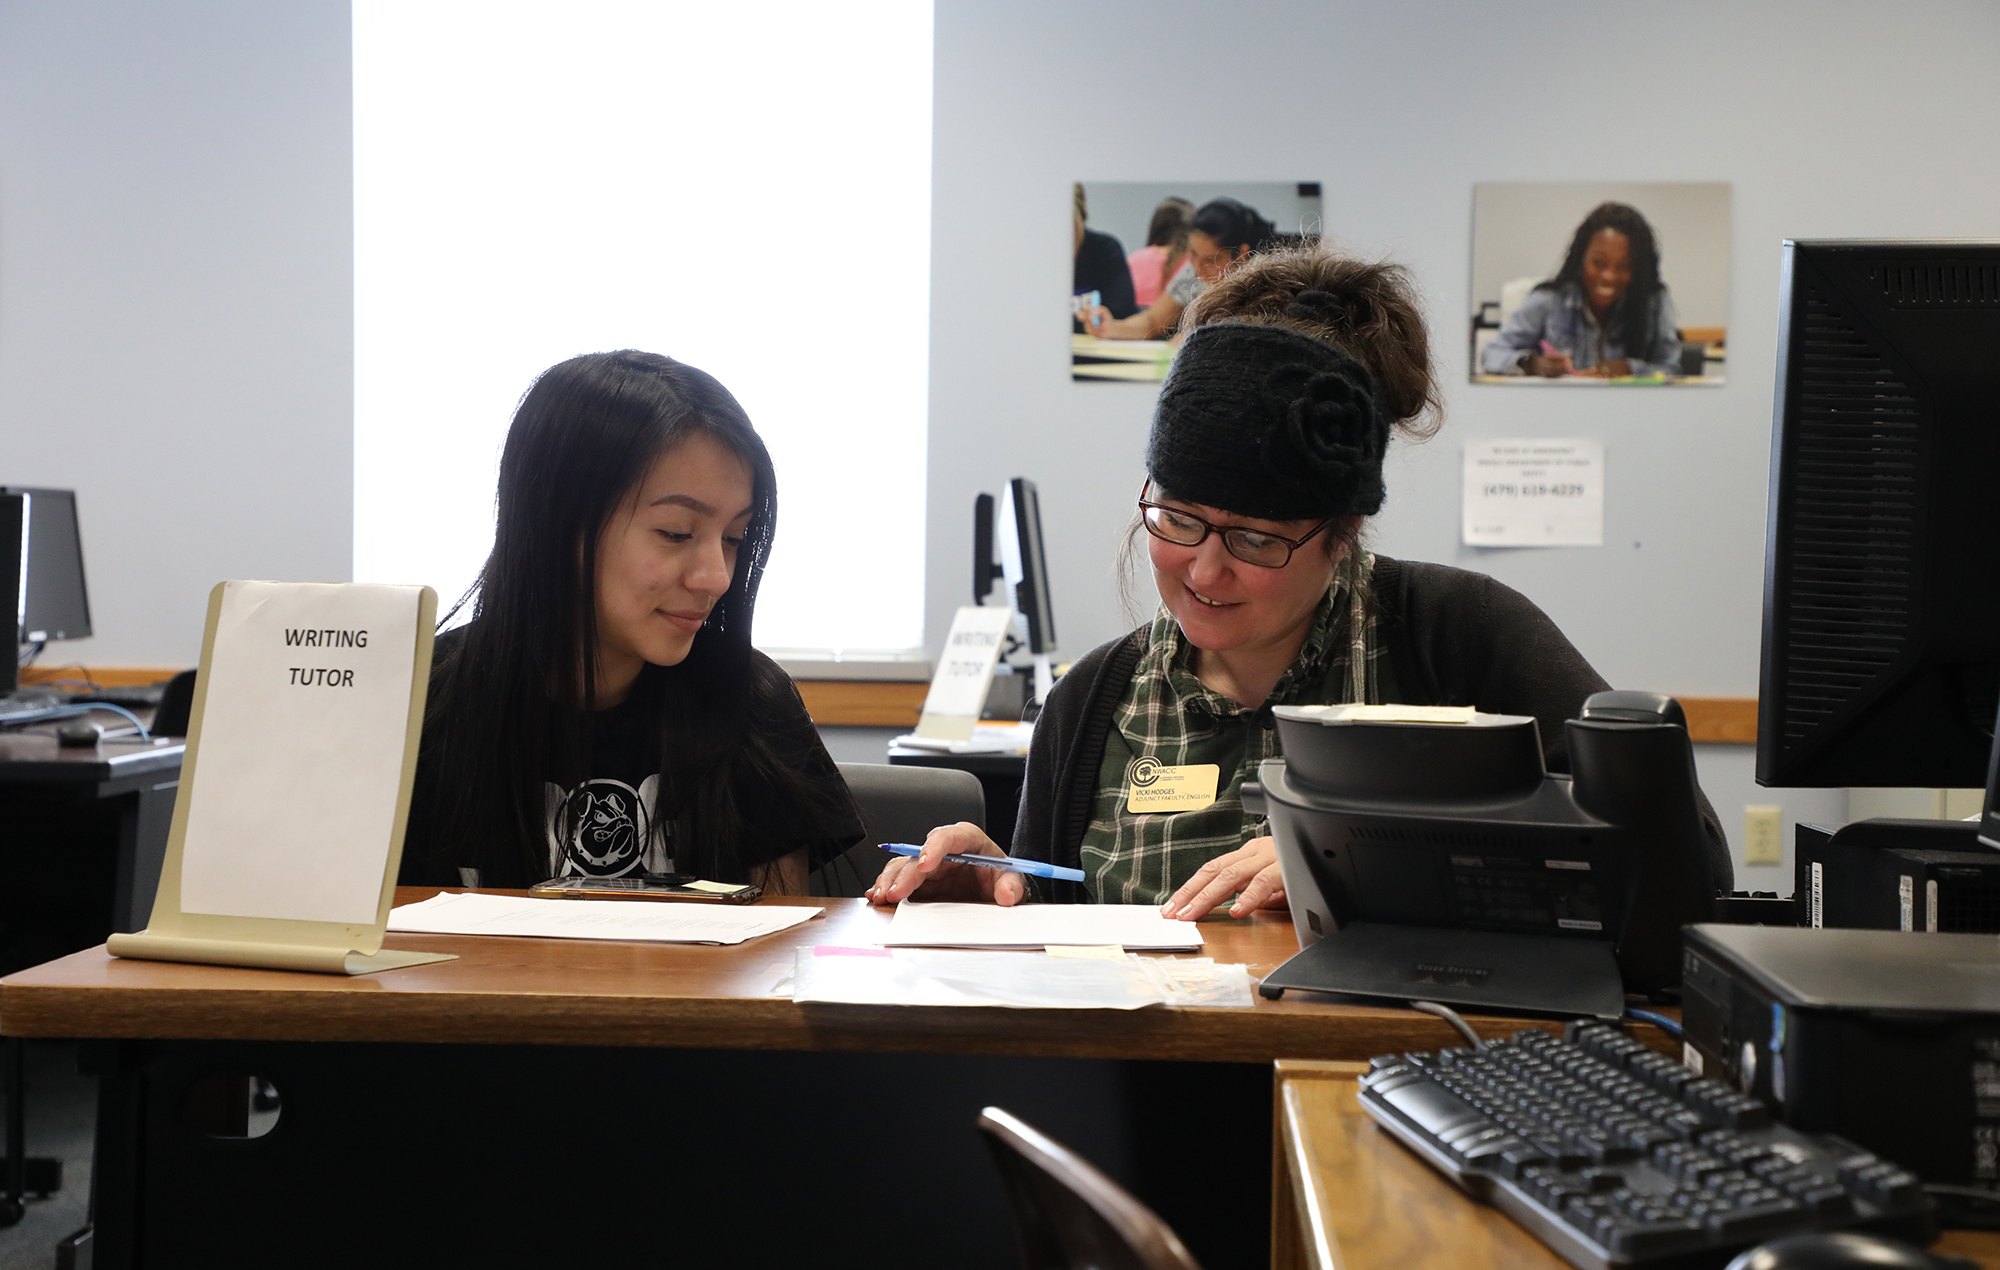 Mature woman tutoring a young female student in writing